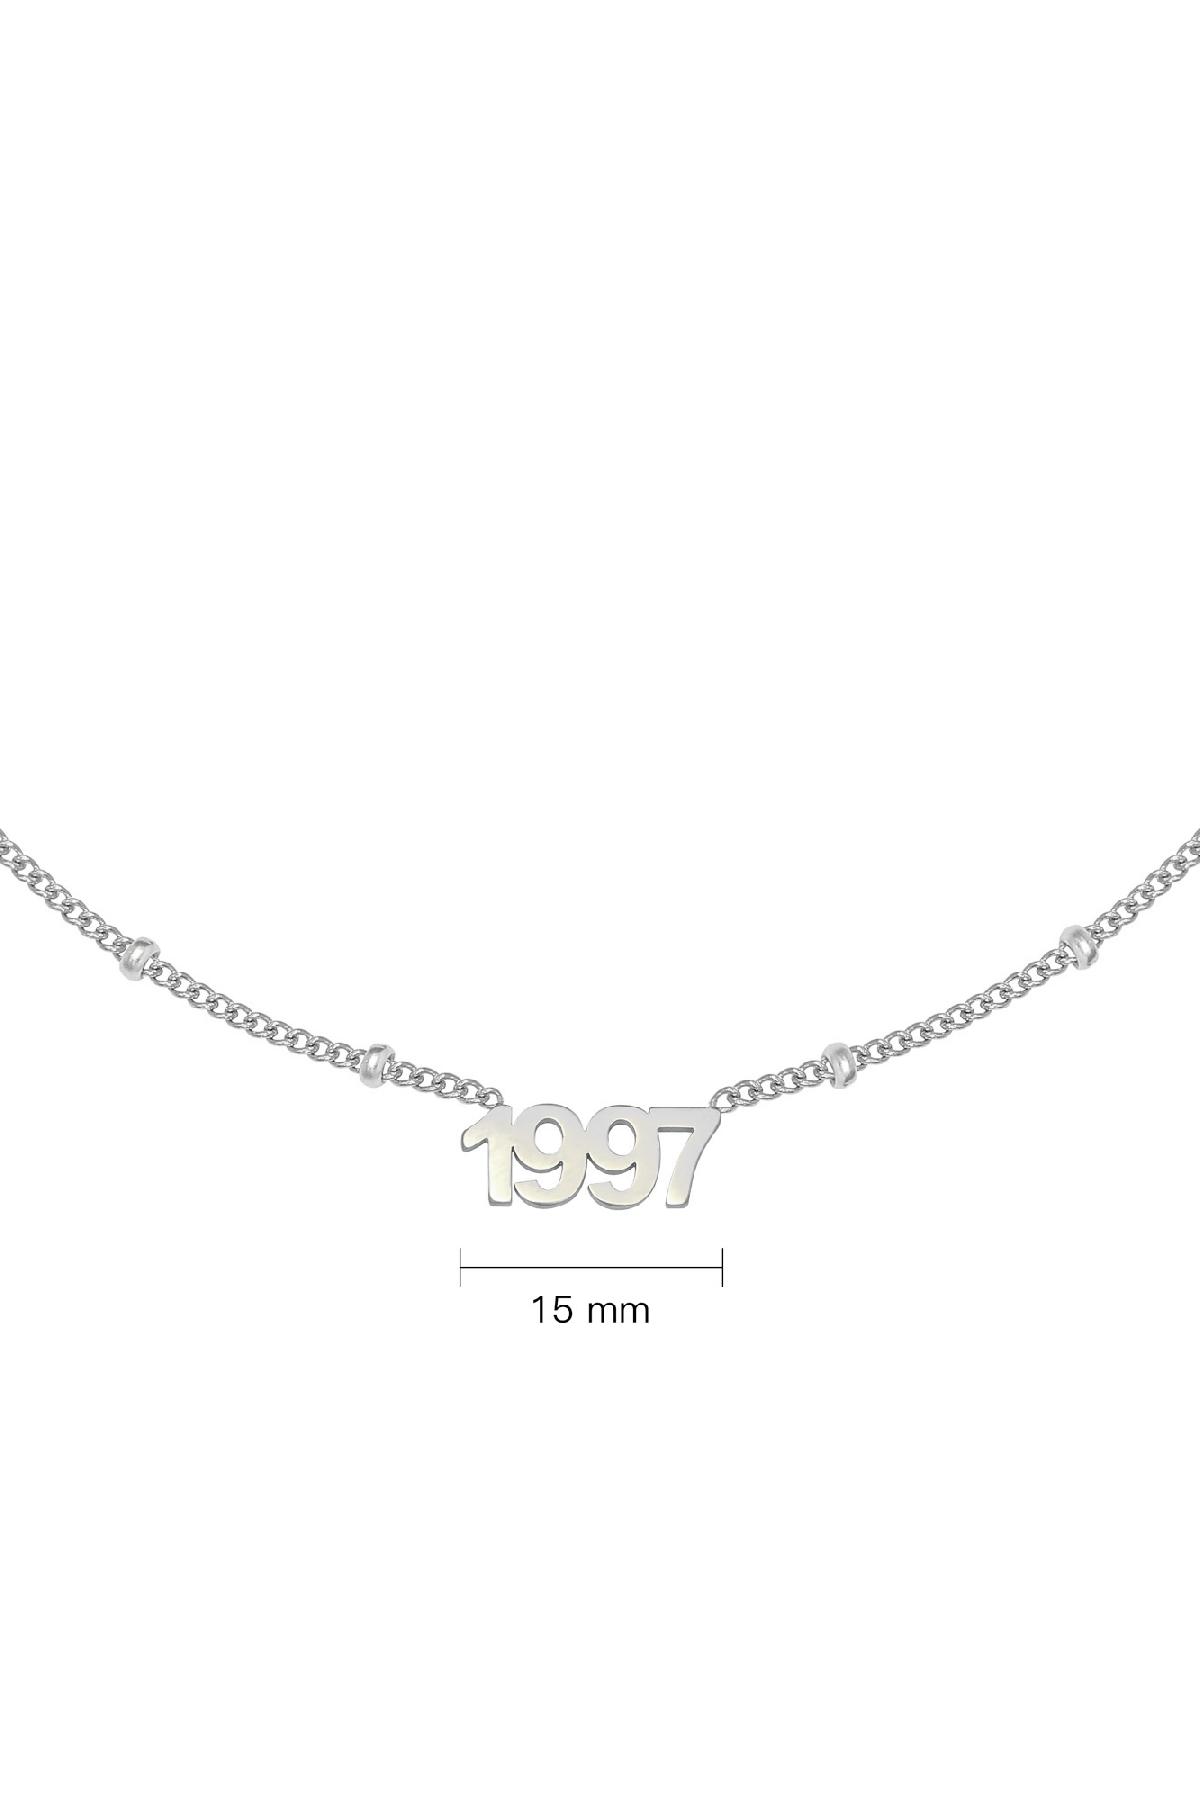 Necklace Year 1997 Silver Stainless Steel Picture2